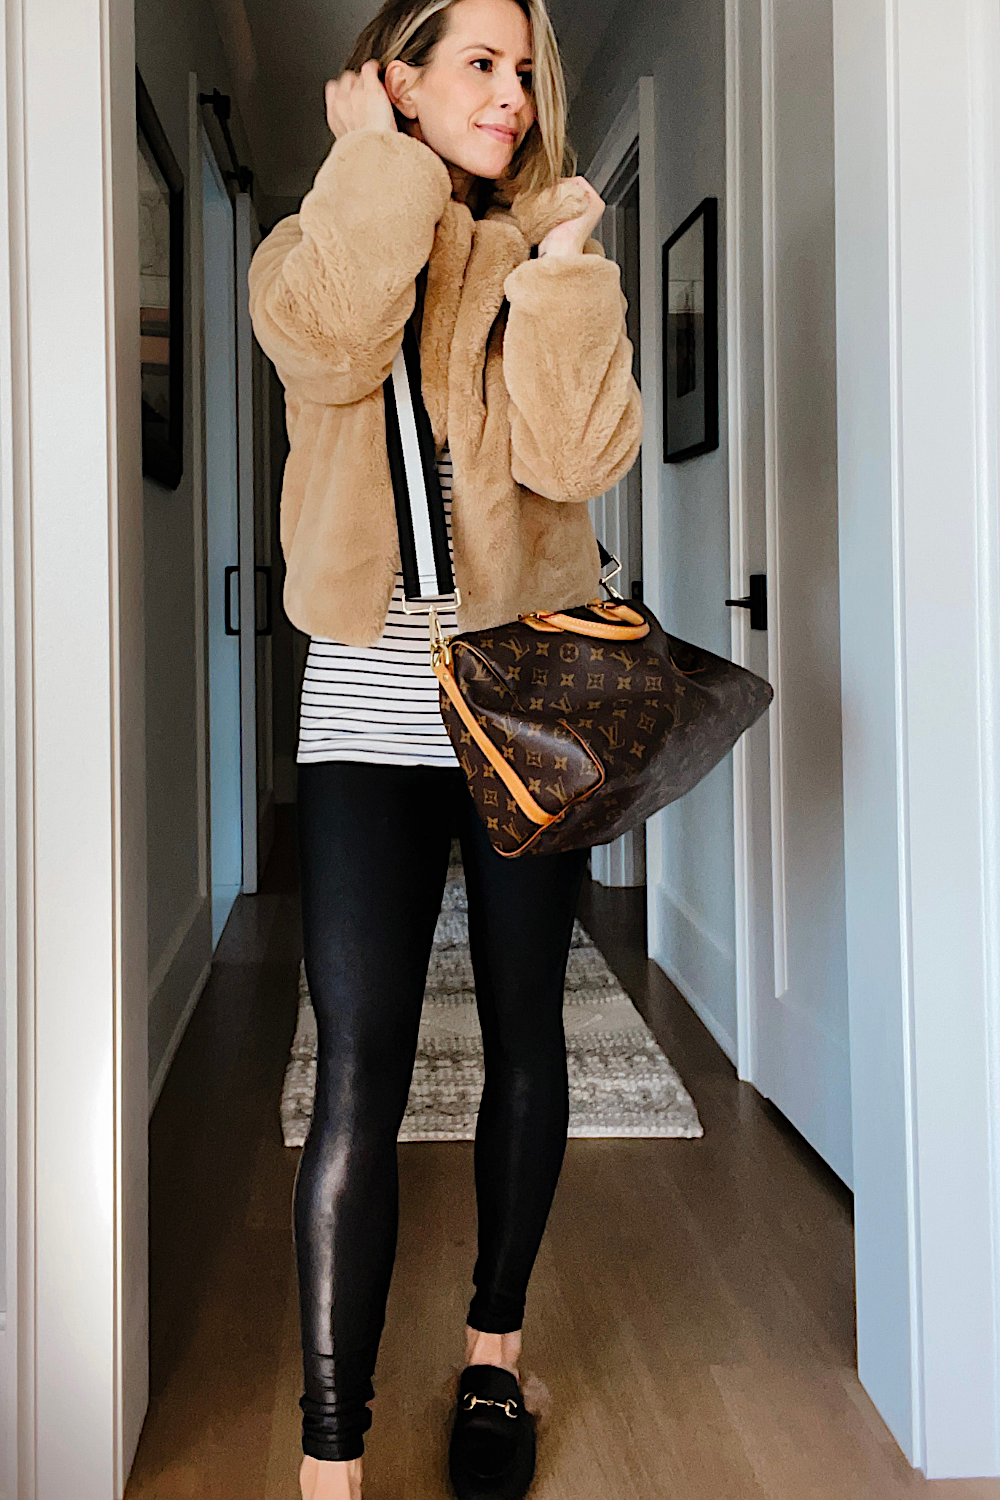 Suzanne wearing a faux fur jacket, striped tee, Spanx faux leather leggings, and a Louis Vuitton handbag